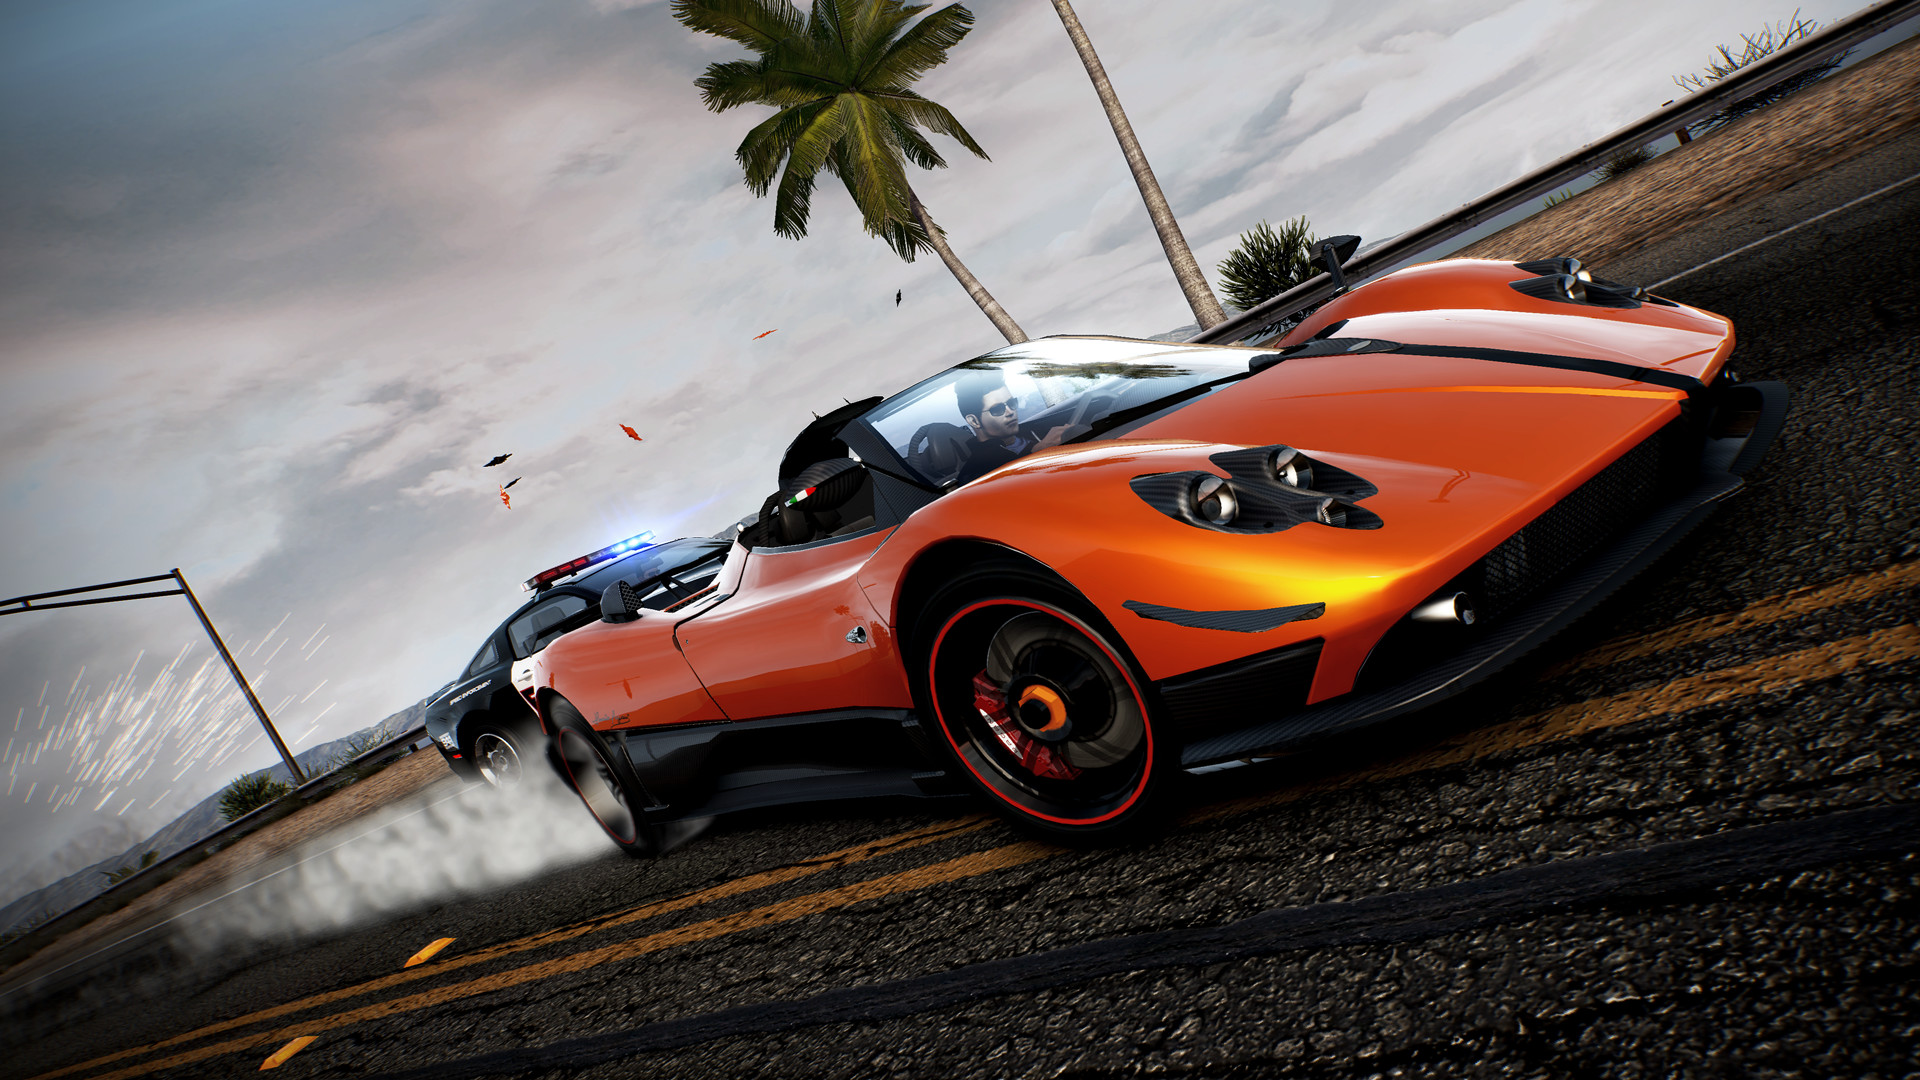 Need for Speed 6102020 1